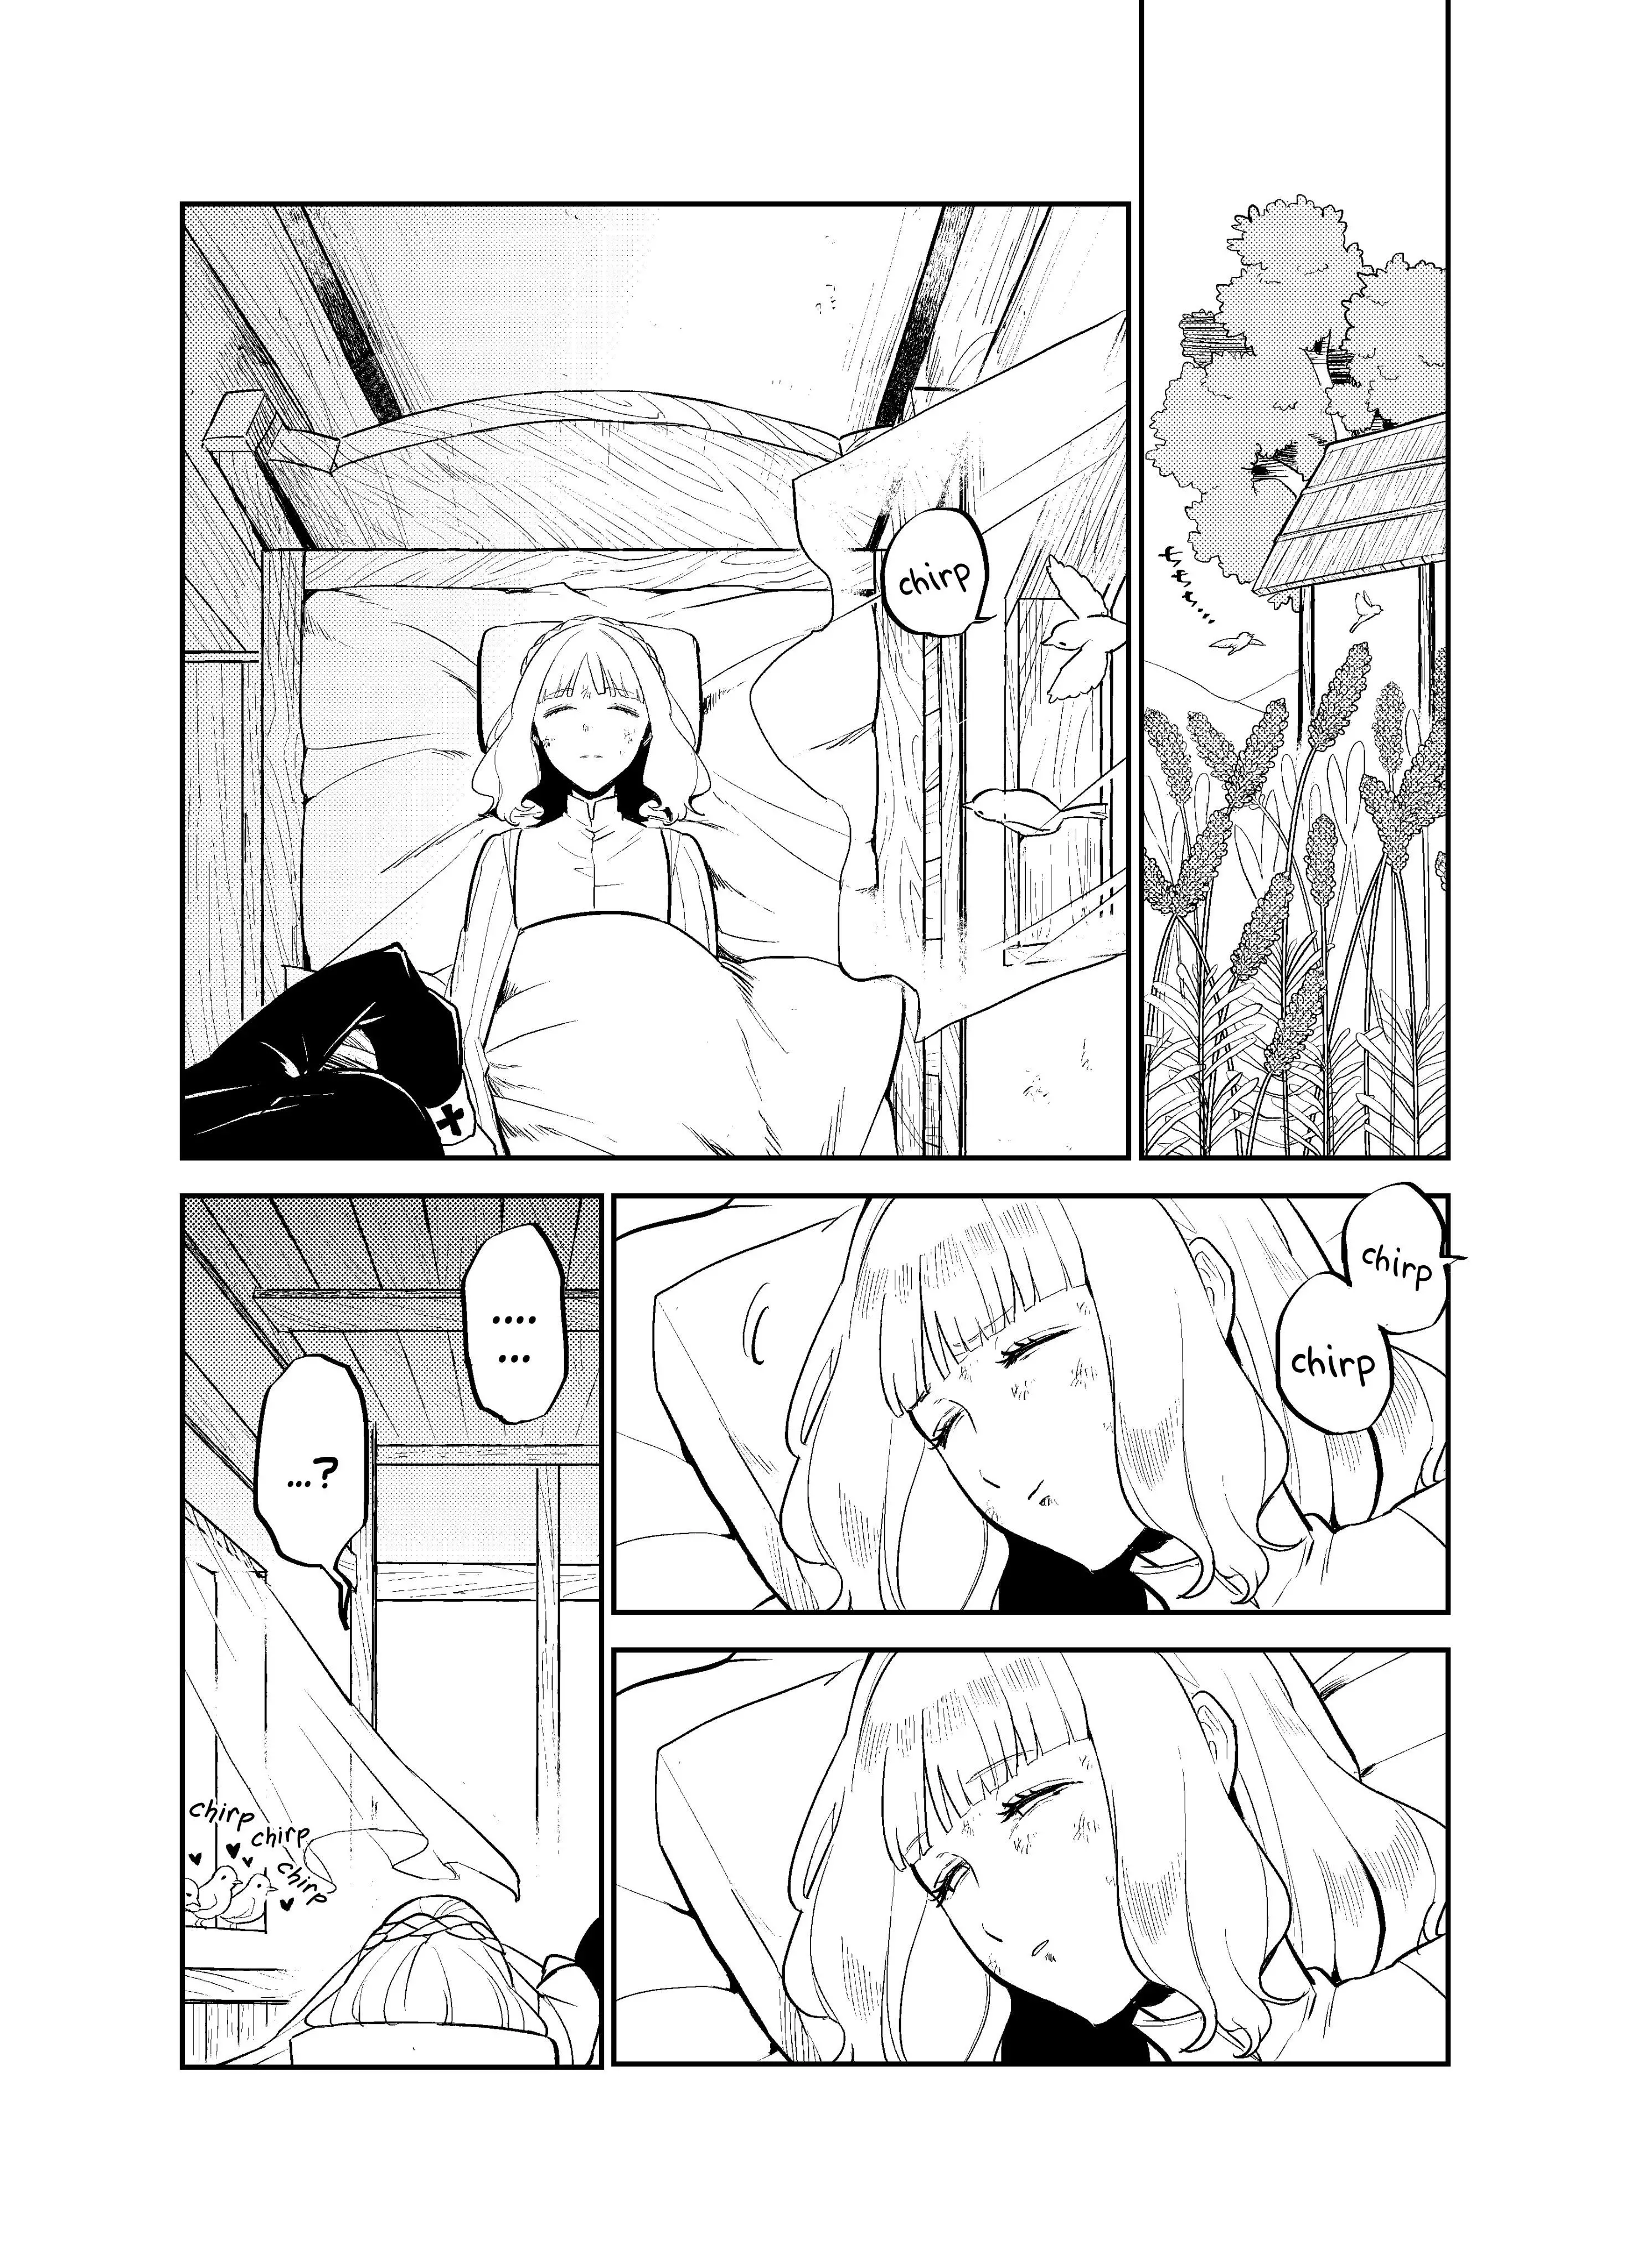 The Princess Of Sylph (Twitter Version) - 34 page 1-c128b1a4